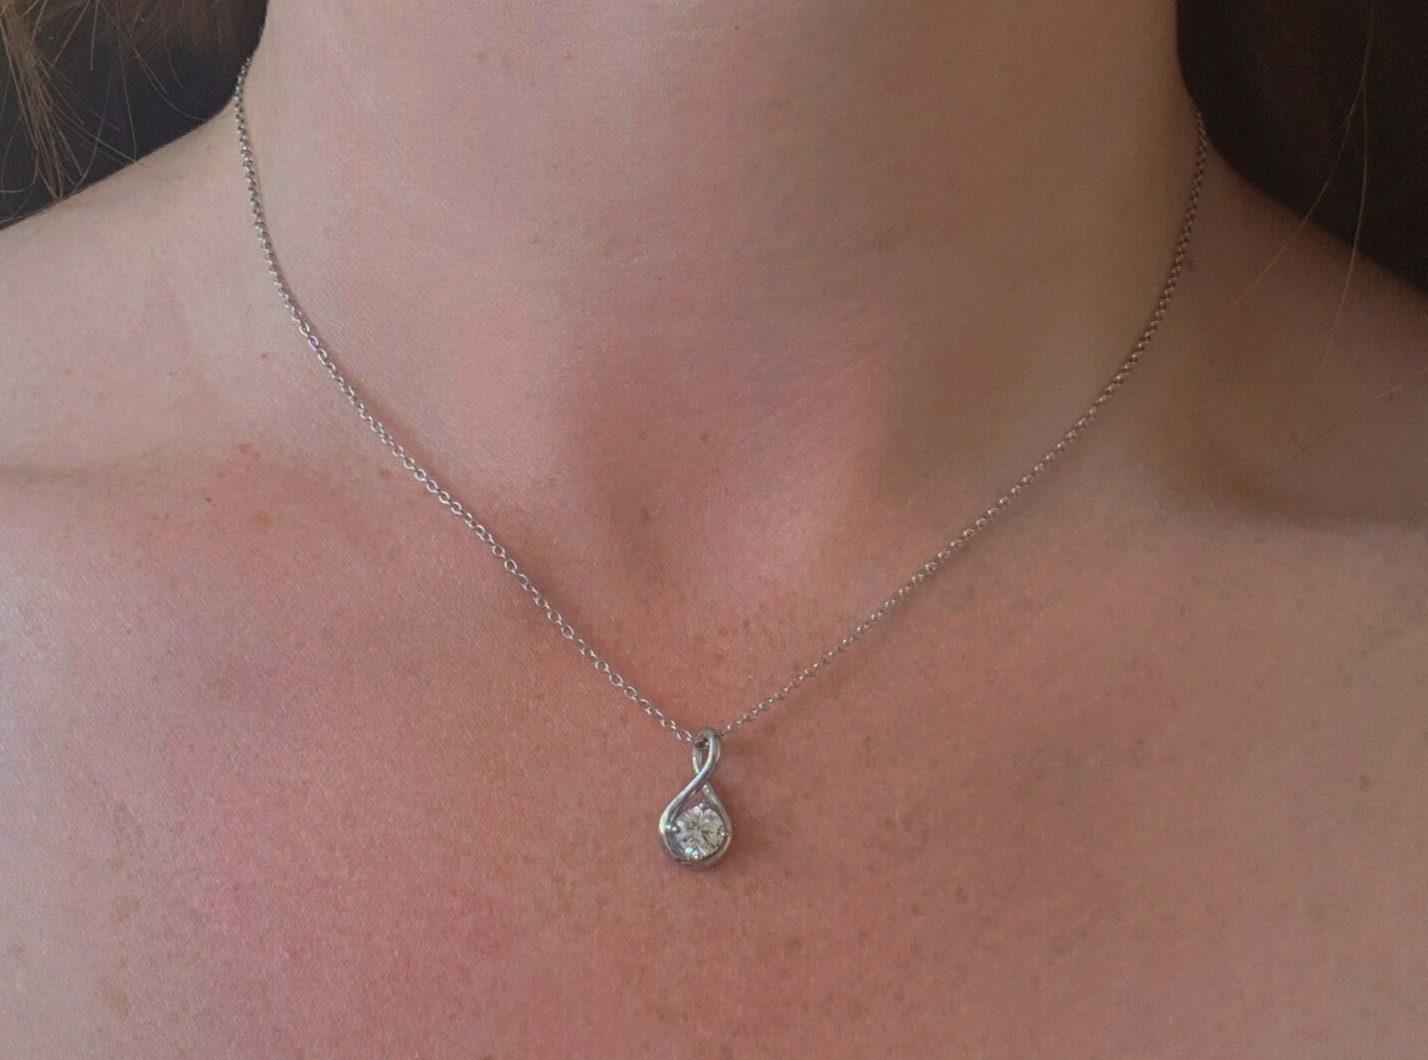 Twist style Necklace with Man Made Diamond Simulant pendant - available in 5mm, 6mm stone sizes - titanium